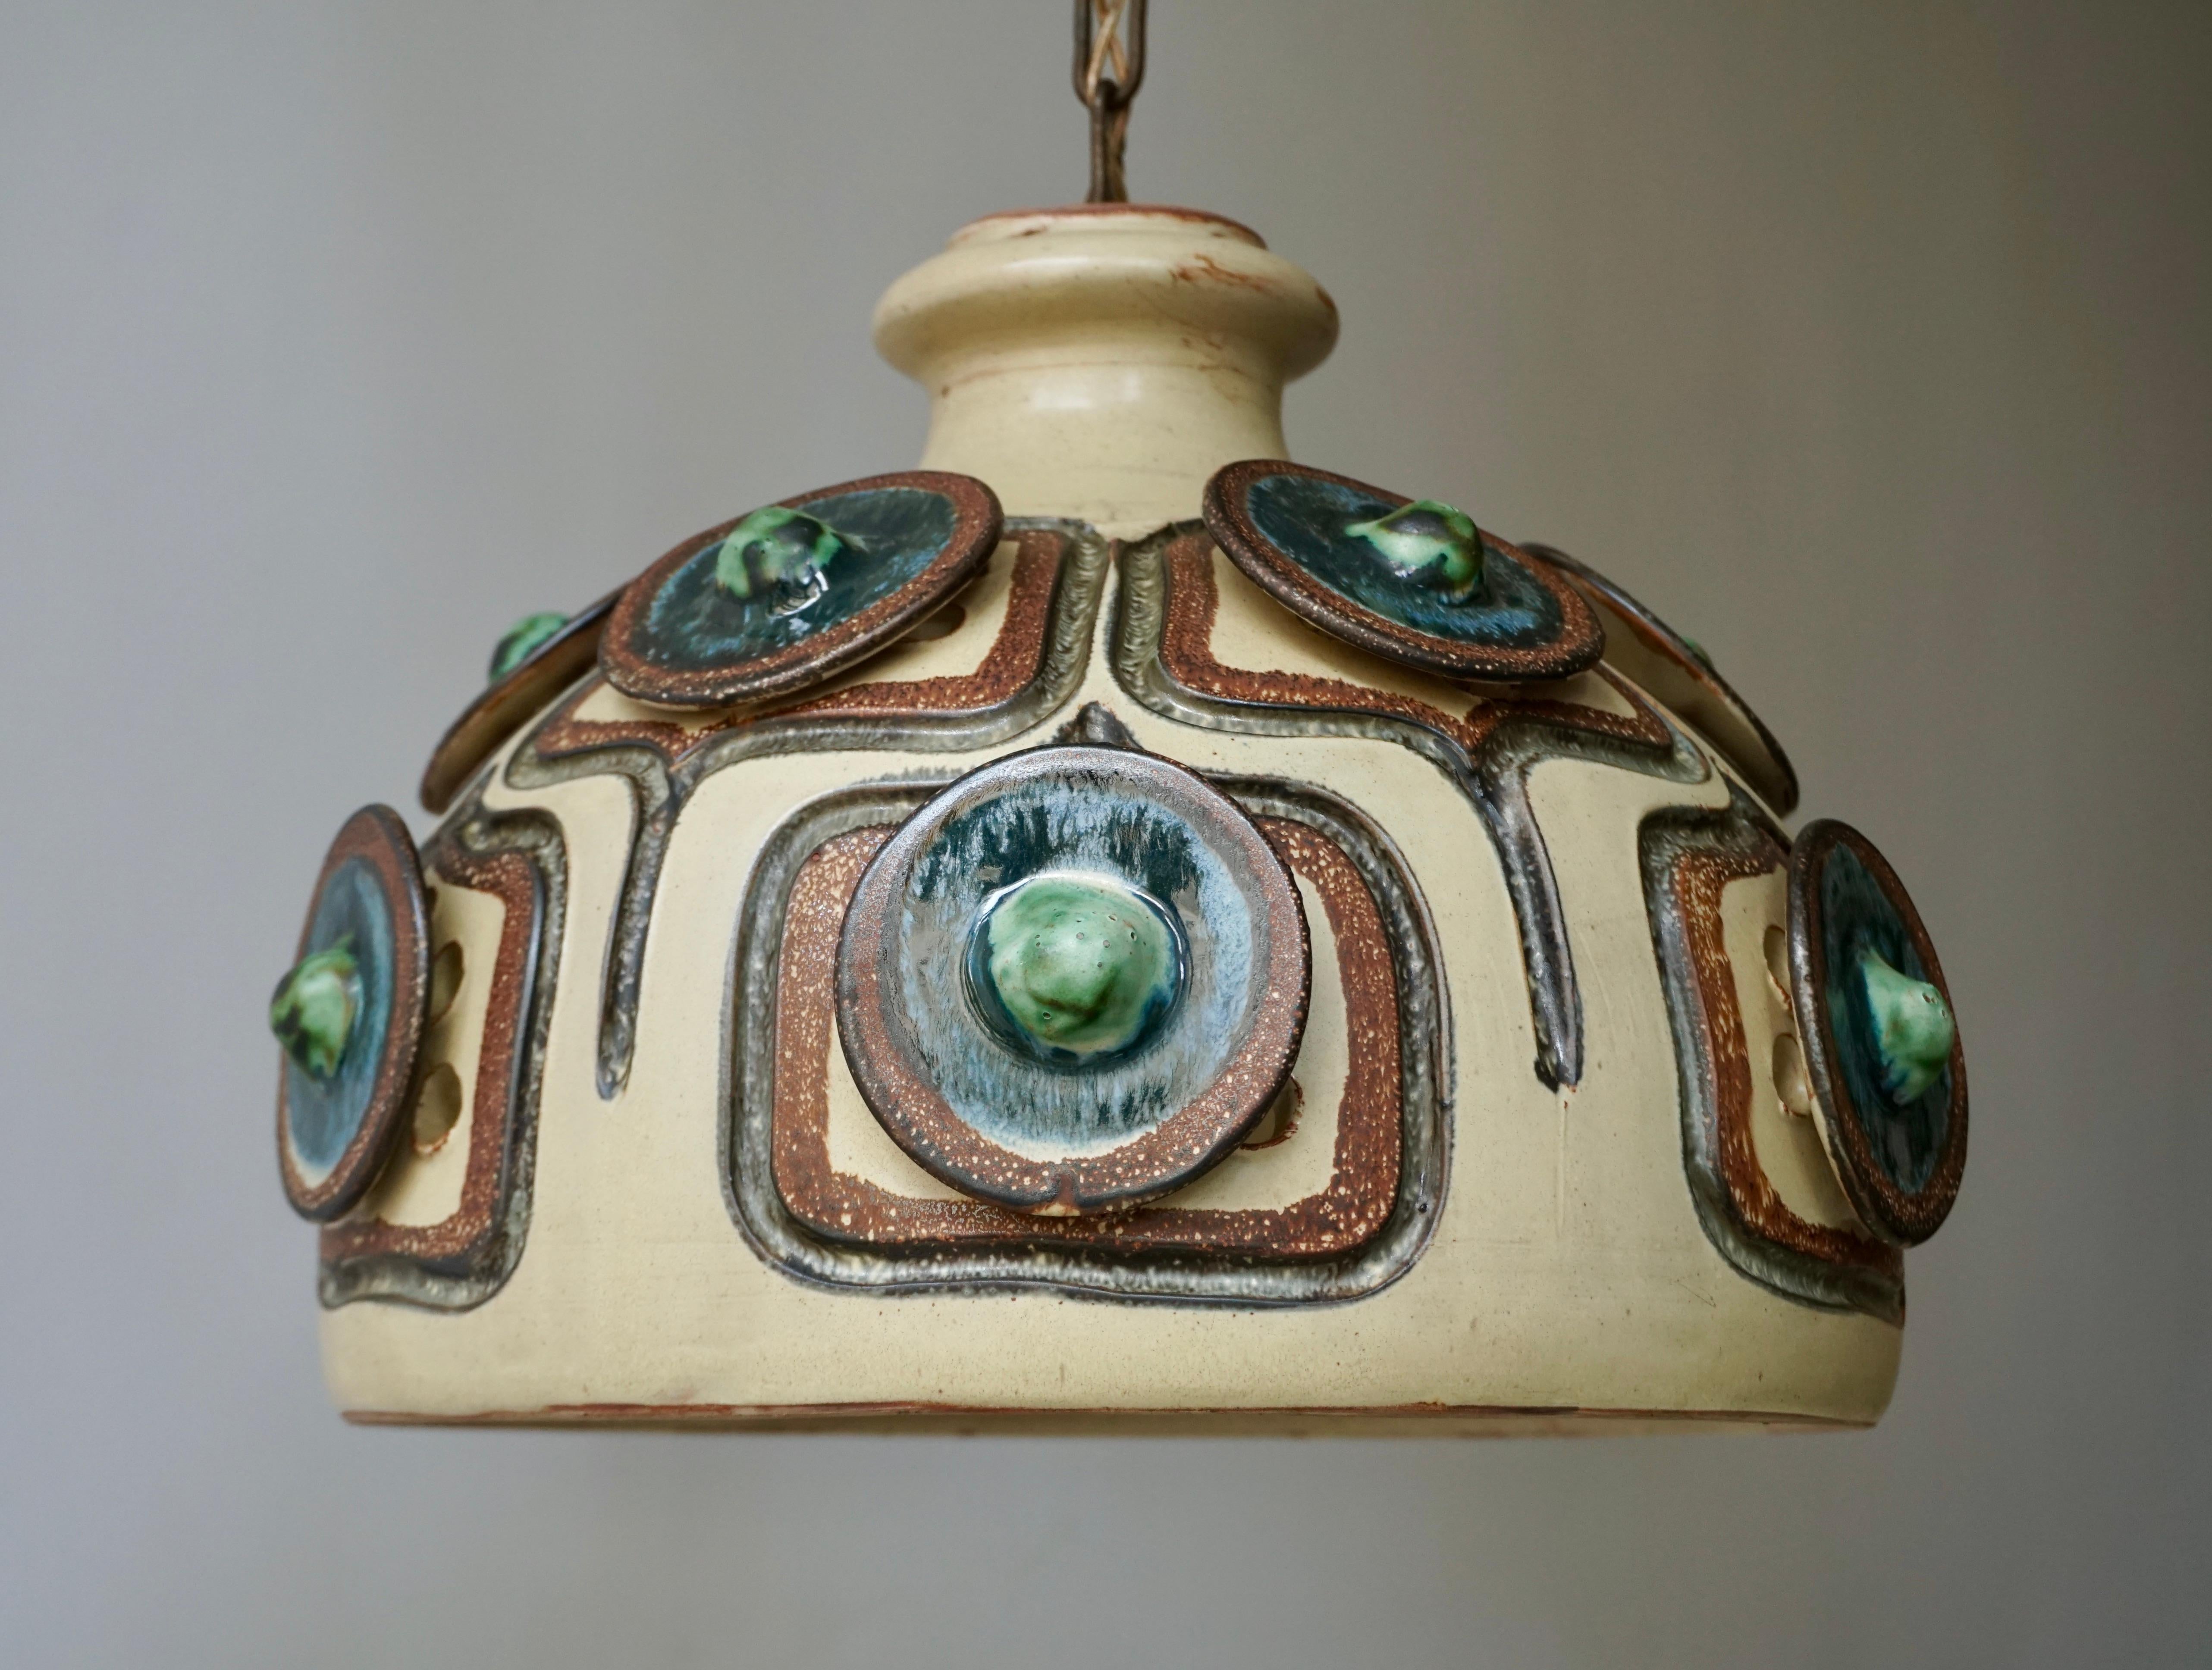 Handmade Danish ceramic ceiling light made by Jette Hellerøe for Axella in the 1970s.
It´s glazed in a mix of beige, blue, brown and green colors.
The pendant takes one x E27 bulb max 60 watt.
Measures: Diameter 35 cm.
Height fixture 25 cm.
Total